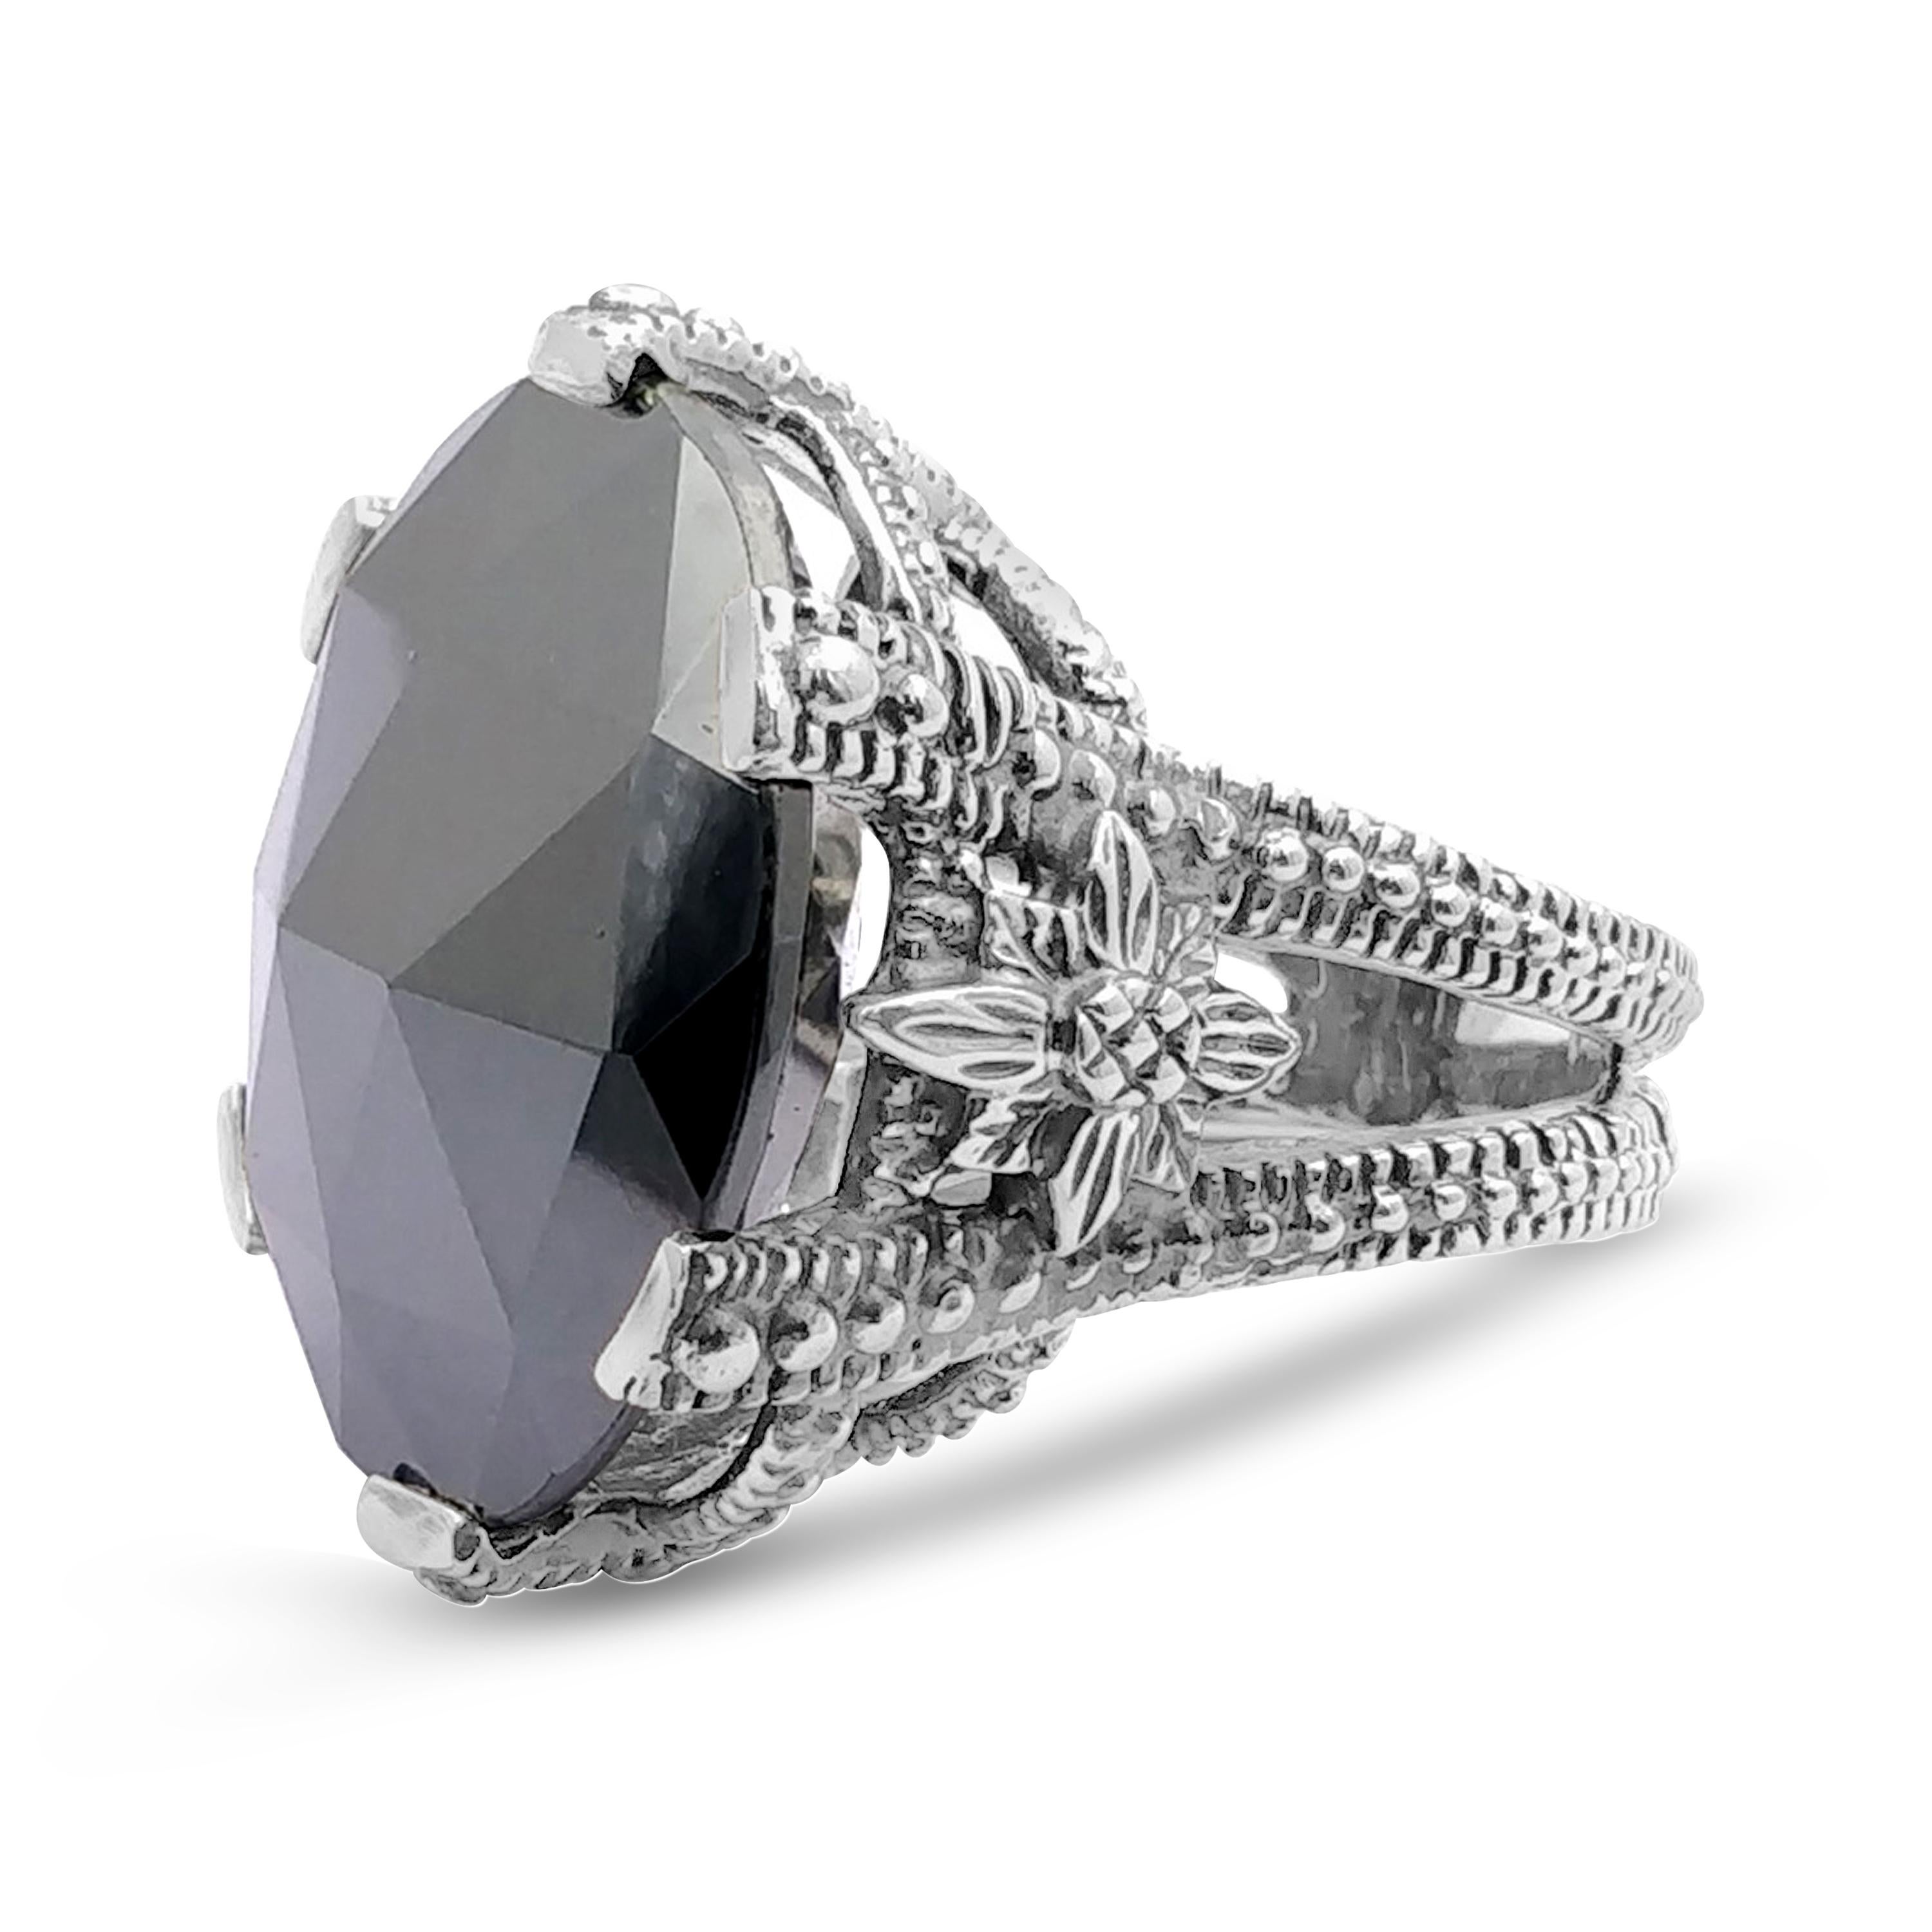 This adventurous Stephen Dweck Sterling Silver Statement Ring features a faceted Hematite (28mm) held by a floral carved basket of sterling silver. Drawing inspiration from a love of nature and passion for art, each Stephen Dweck creation is a